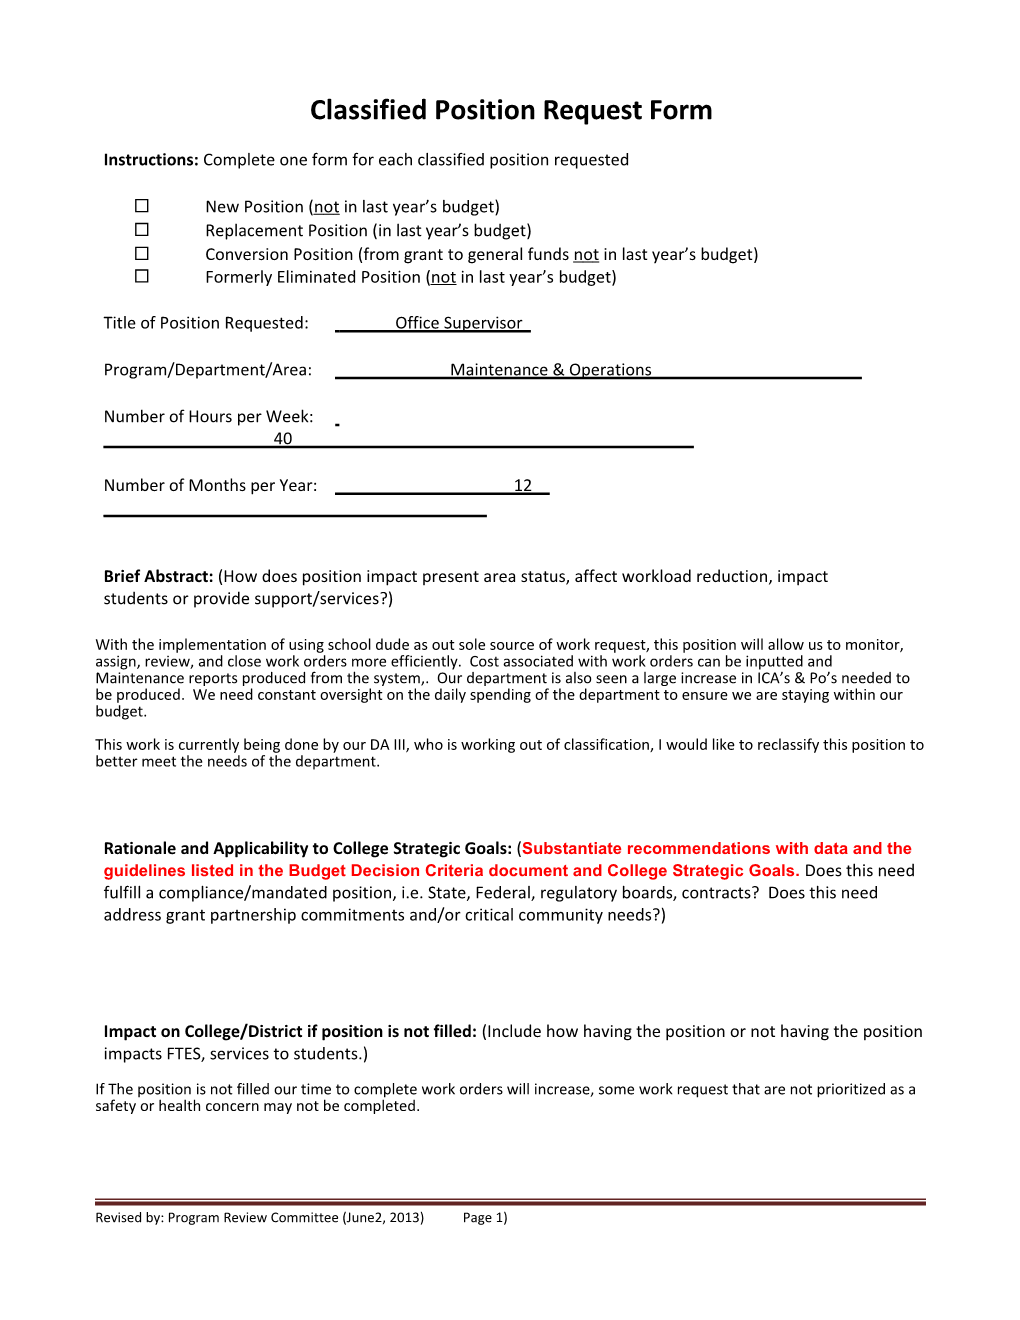 Classifiedposition Request Form